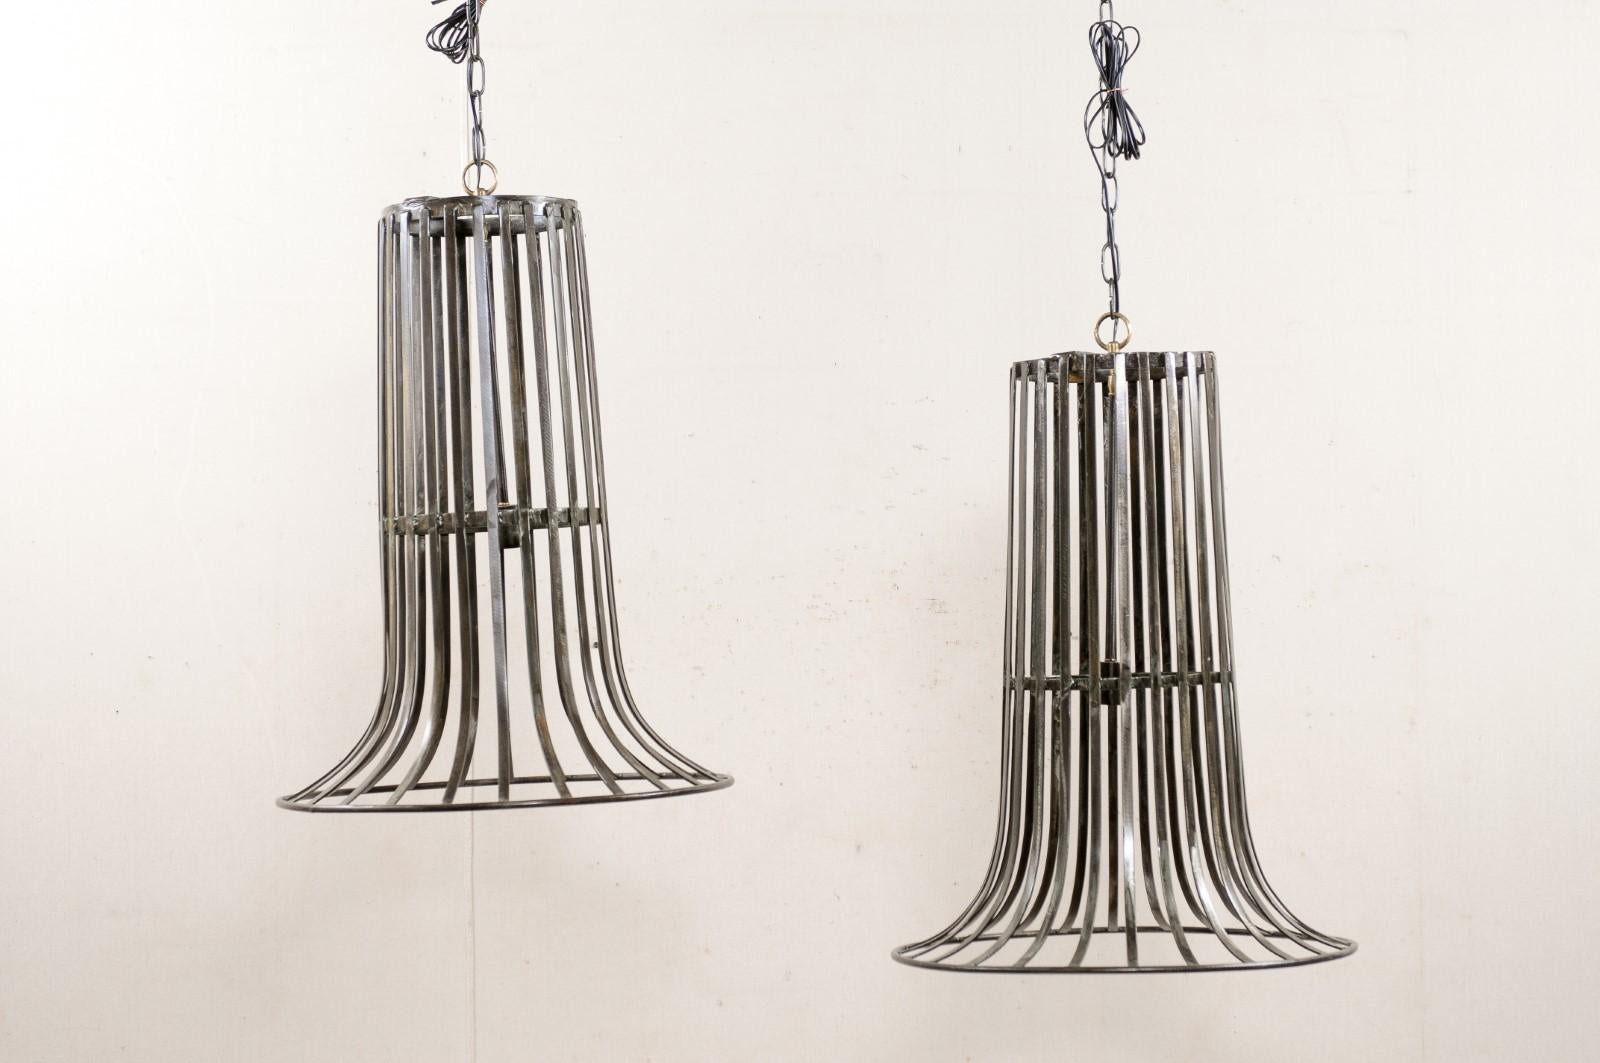 These custom pair of tall hanging metal light fixtures have been created by re-purposing a pair of French vintage iron baskets. This pair of chandeliers are comprised of a vintage metal barrel/basket from France, with iron caged body flipped upside